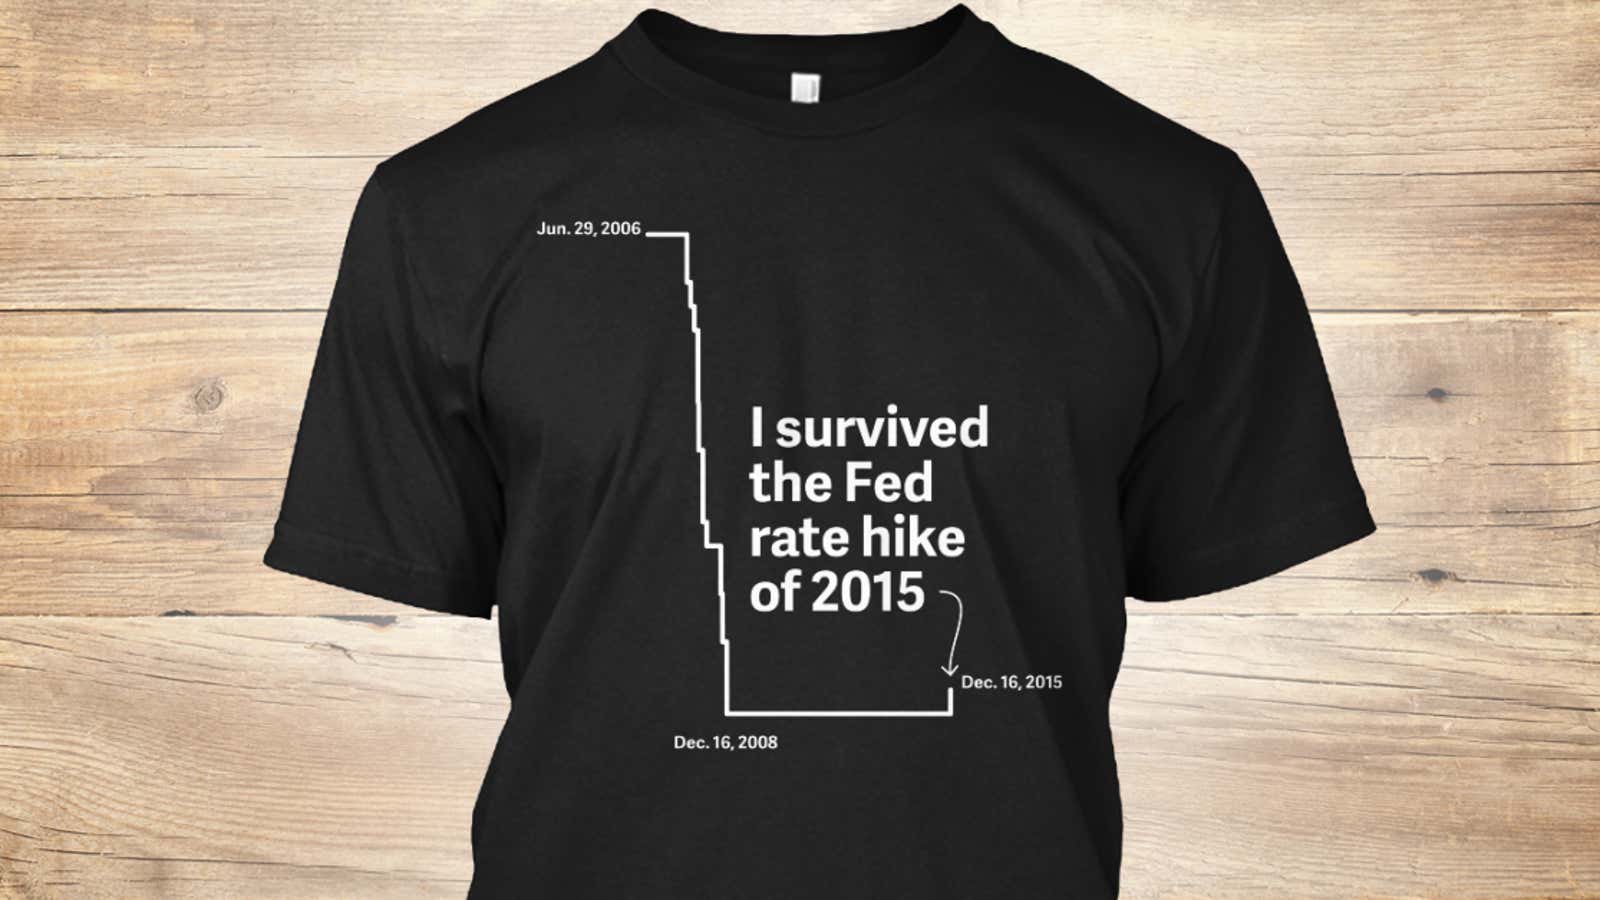 Quartz’s commemorative Fed rate hike T-shirts are now available by popular demand